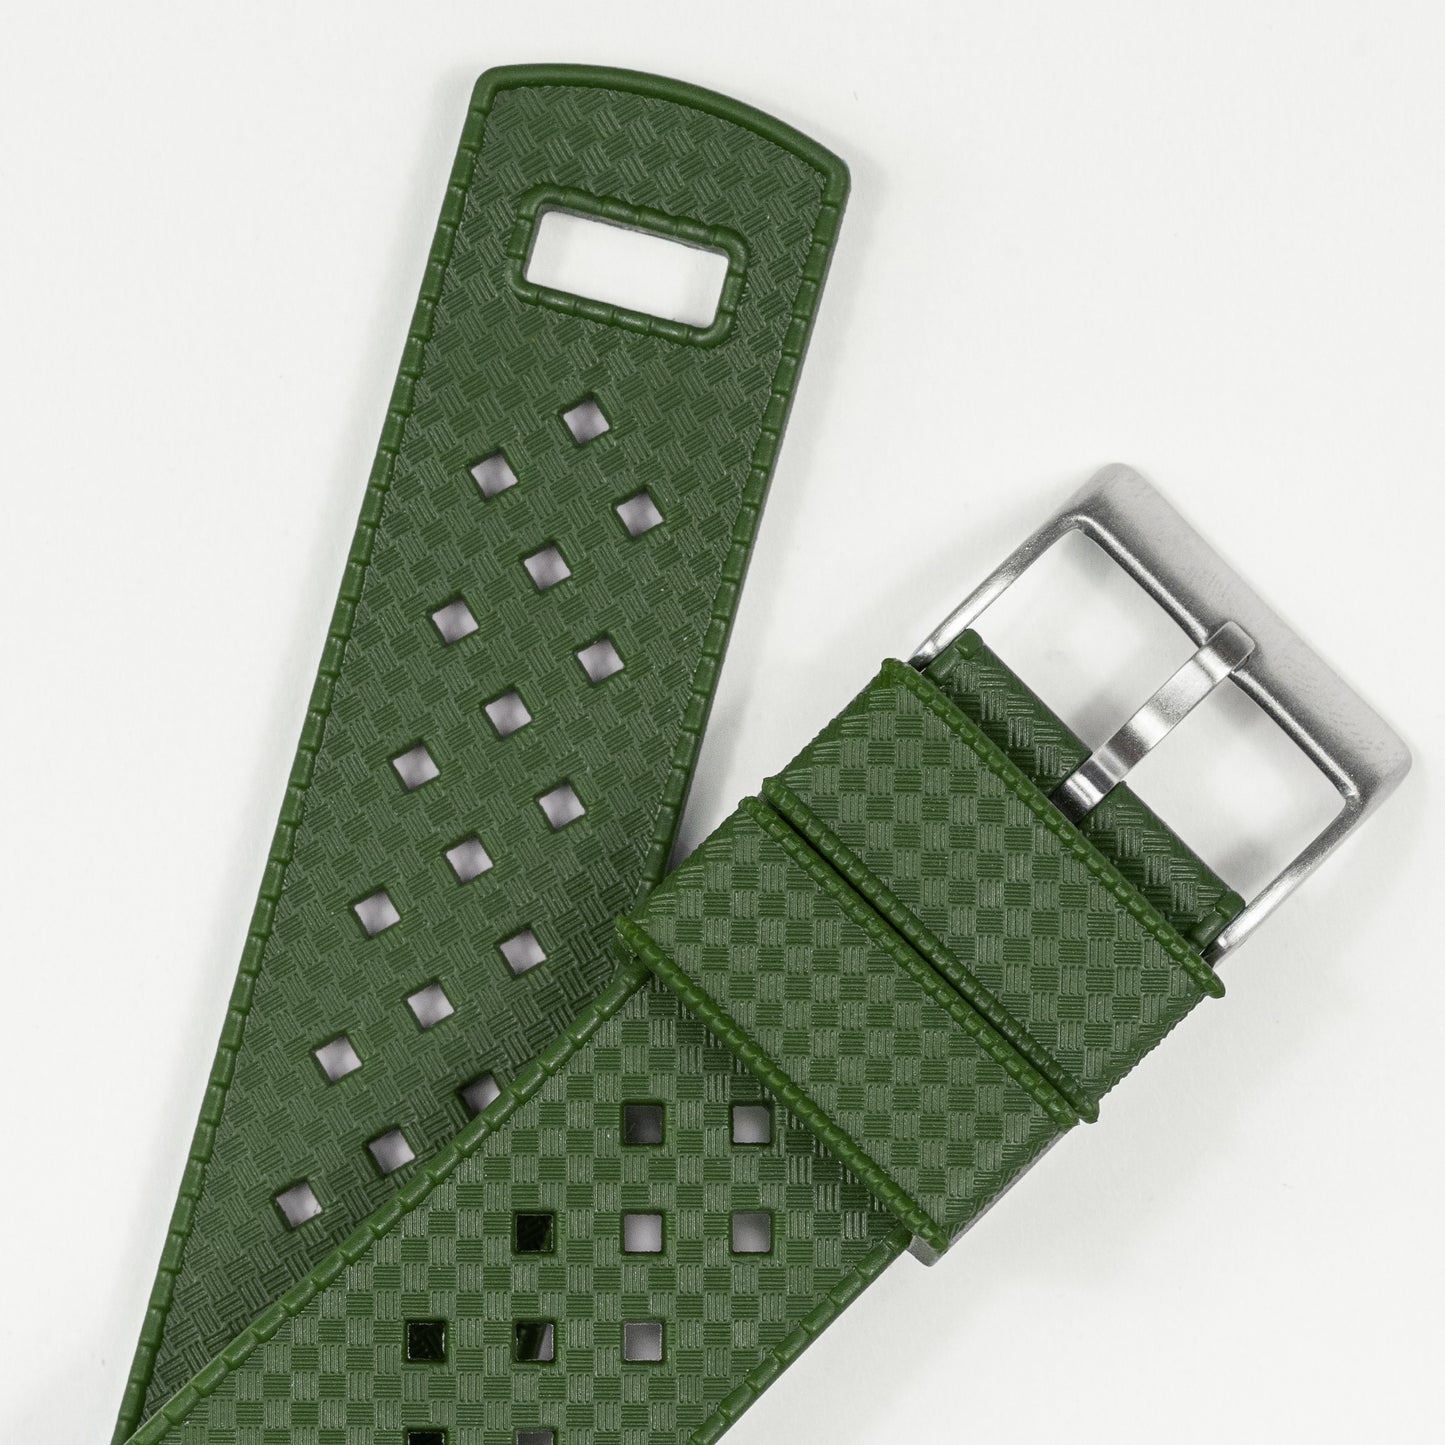 Fossil Sport | Tropical-Style | Army Green - Barton Watch Bands